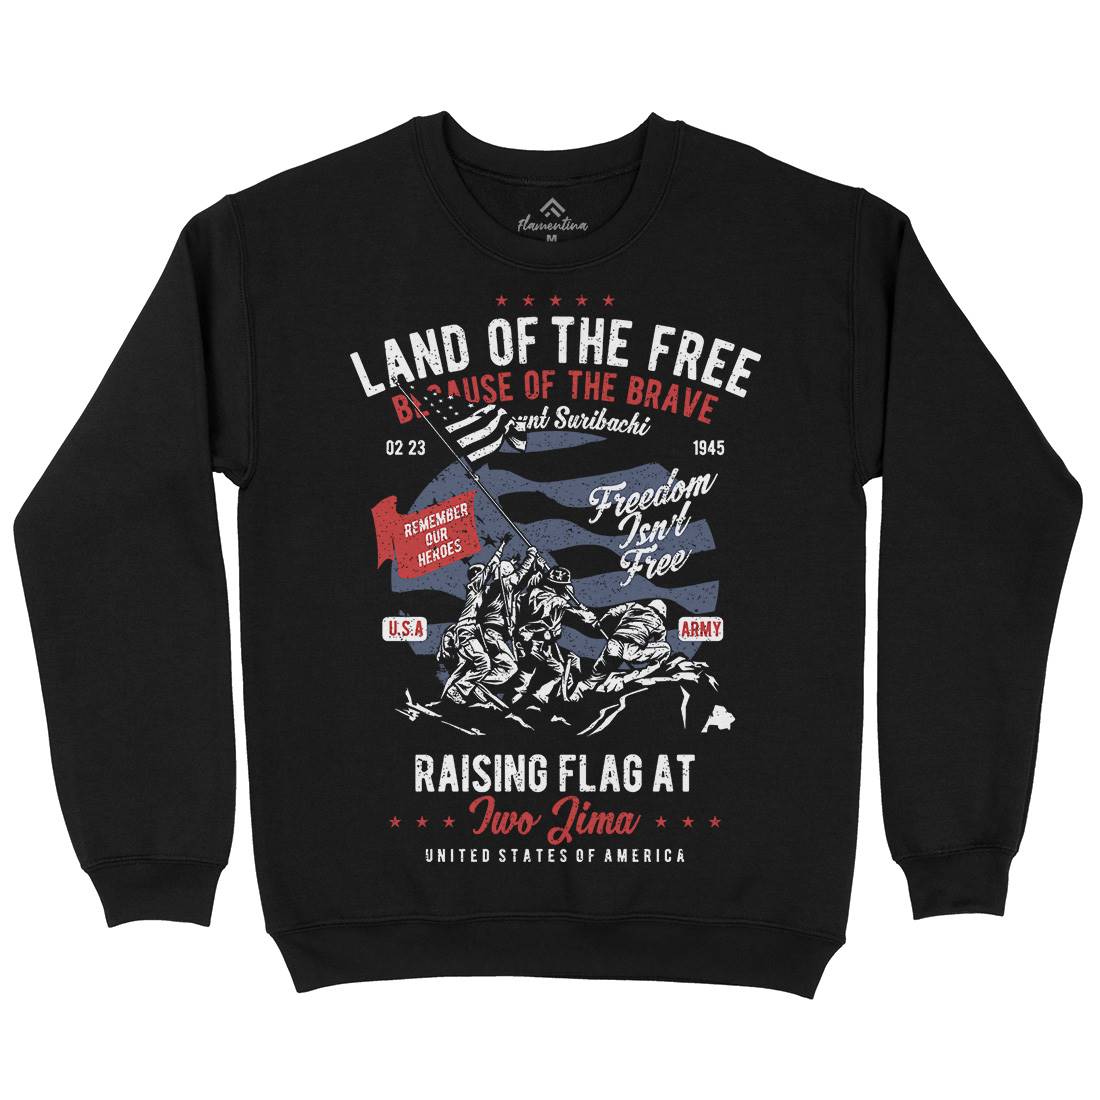 Land Of The Free Kids Crew Neck Sweatshirt Army A702